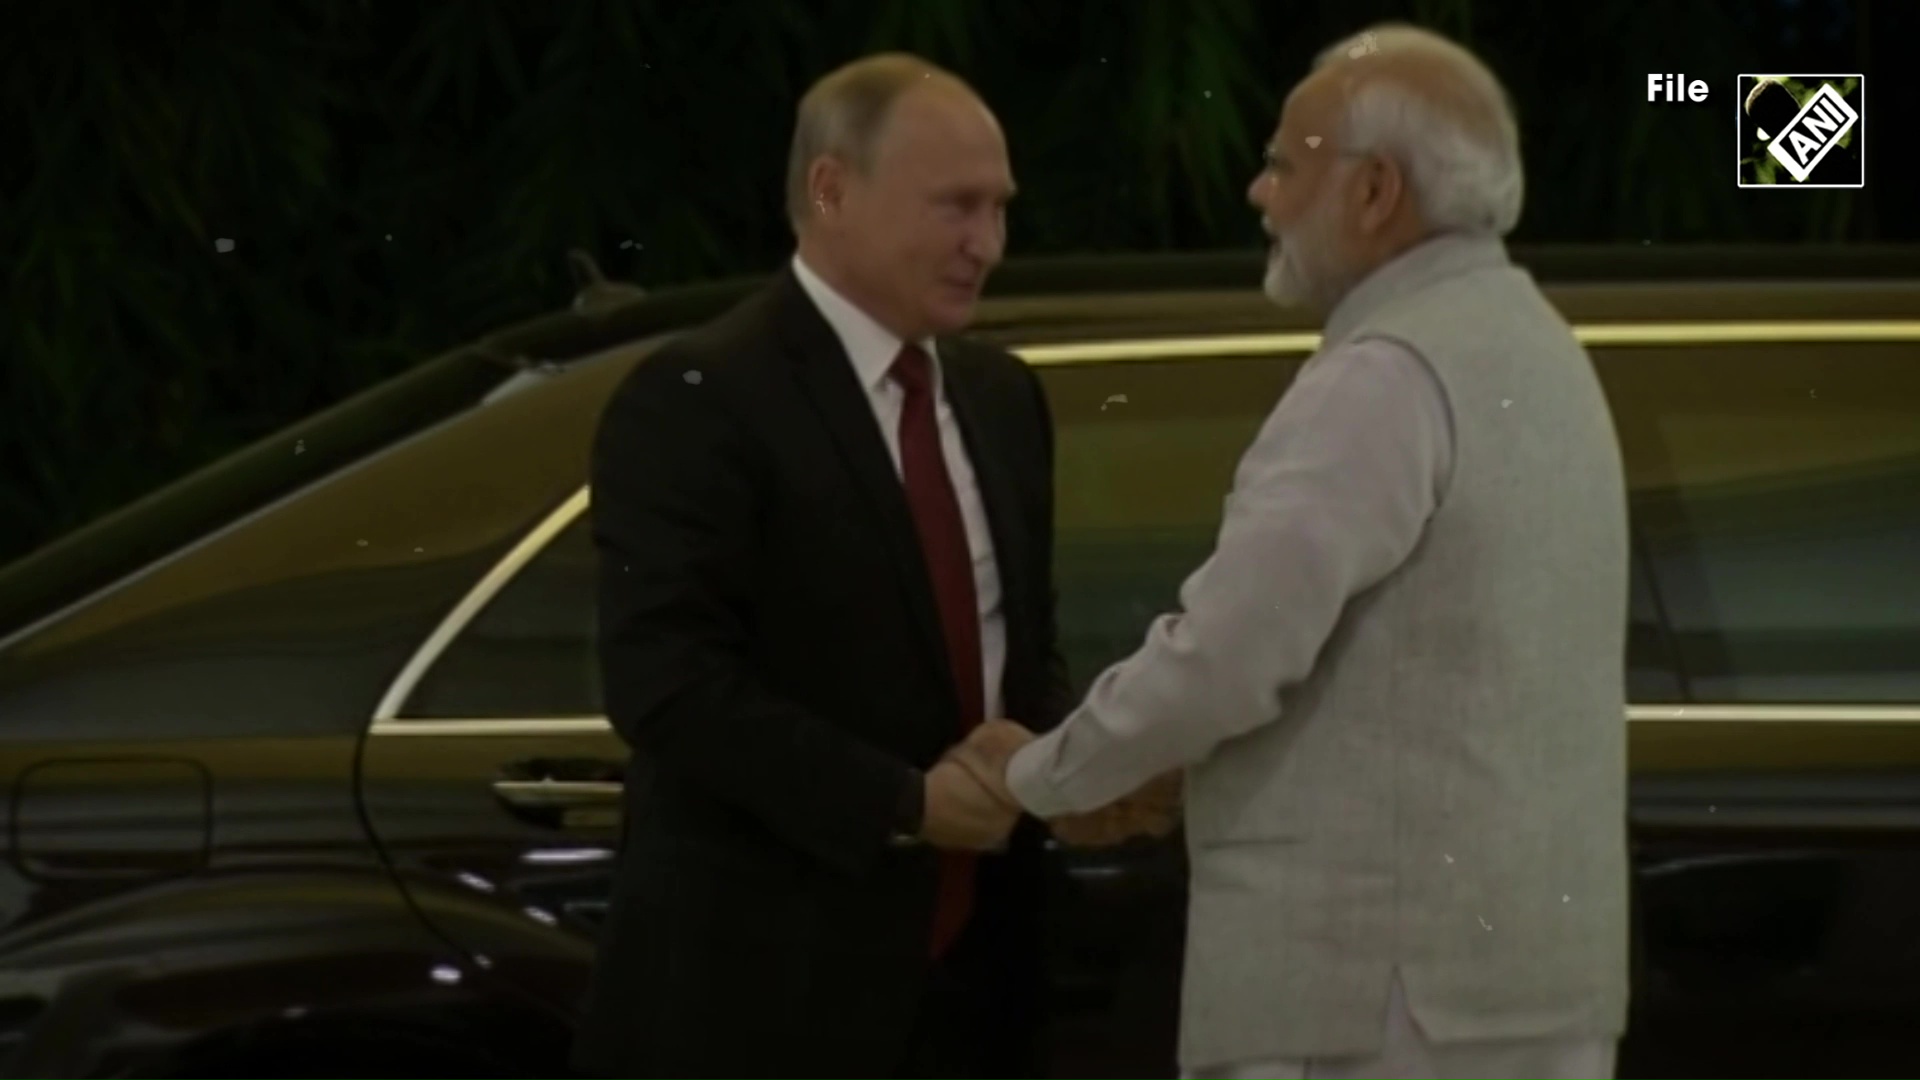 PM Modi to visit Moscow for India-Russia Annual Summit; first trip since Ukraine conflict